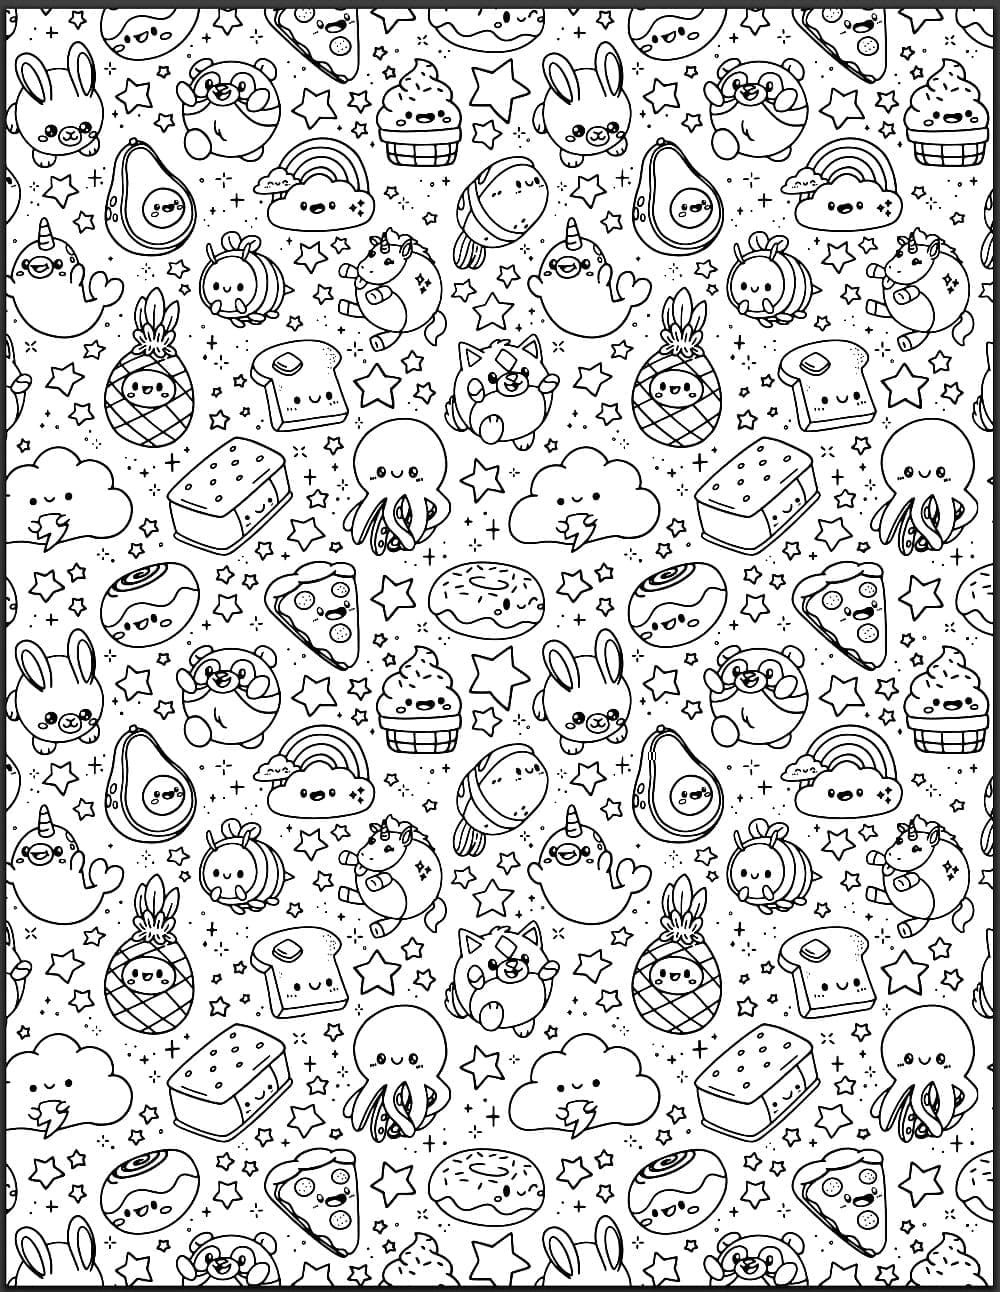 Squishmallows Kawaii coloring page - Download, Print or Color Online ...